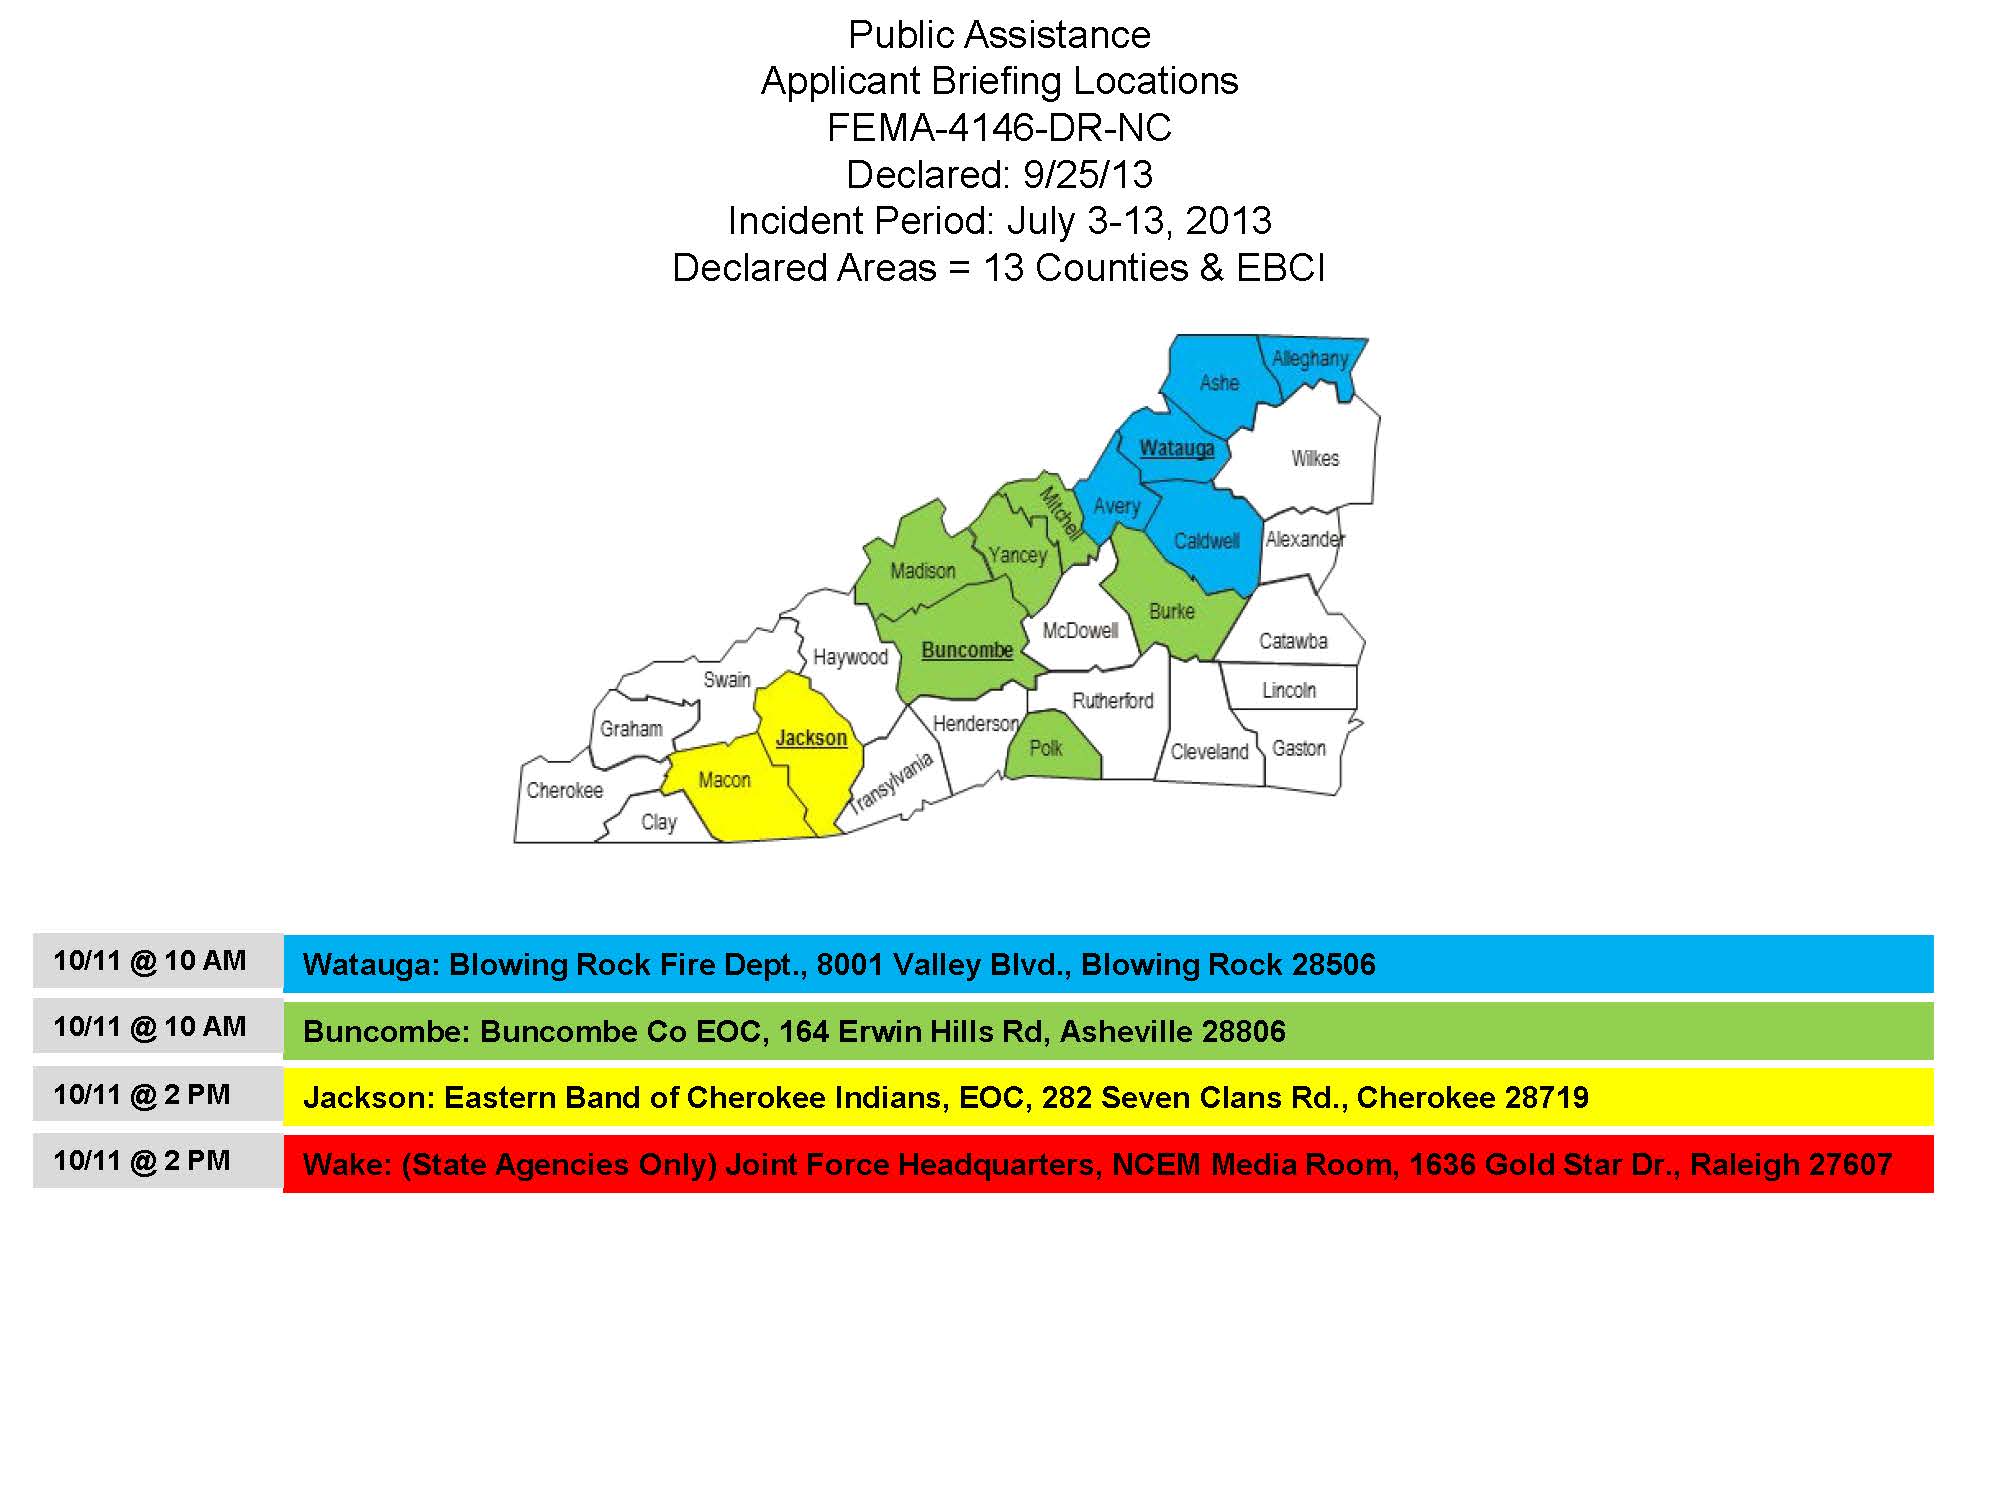 Applicant Briefing Schedule  Locations (2)